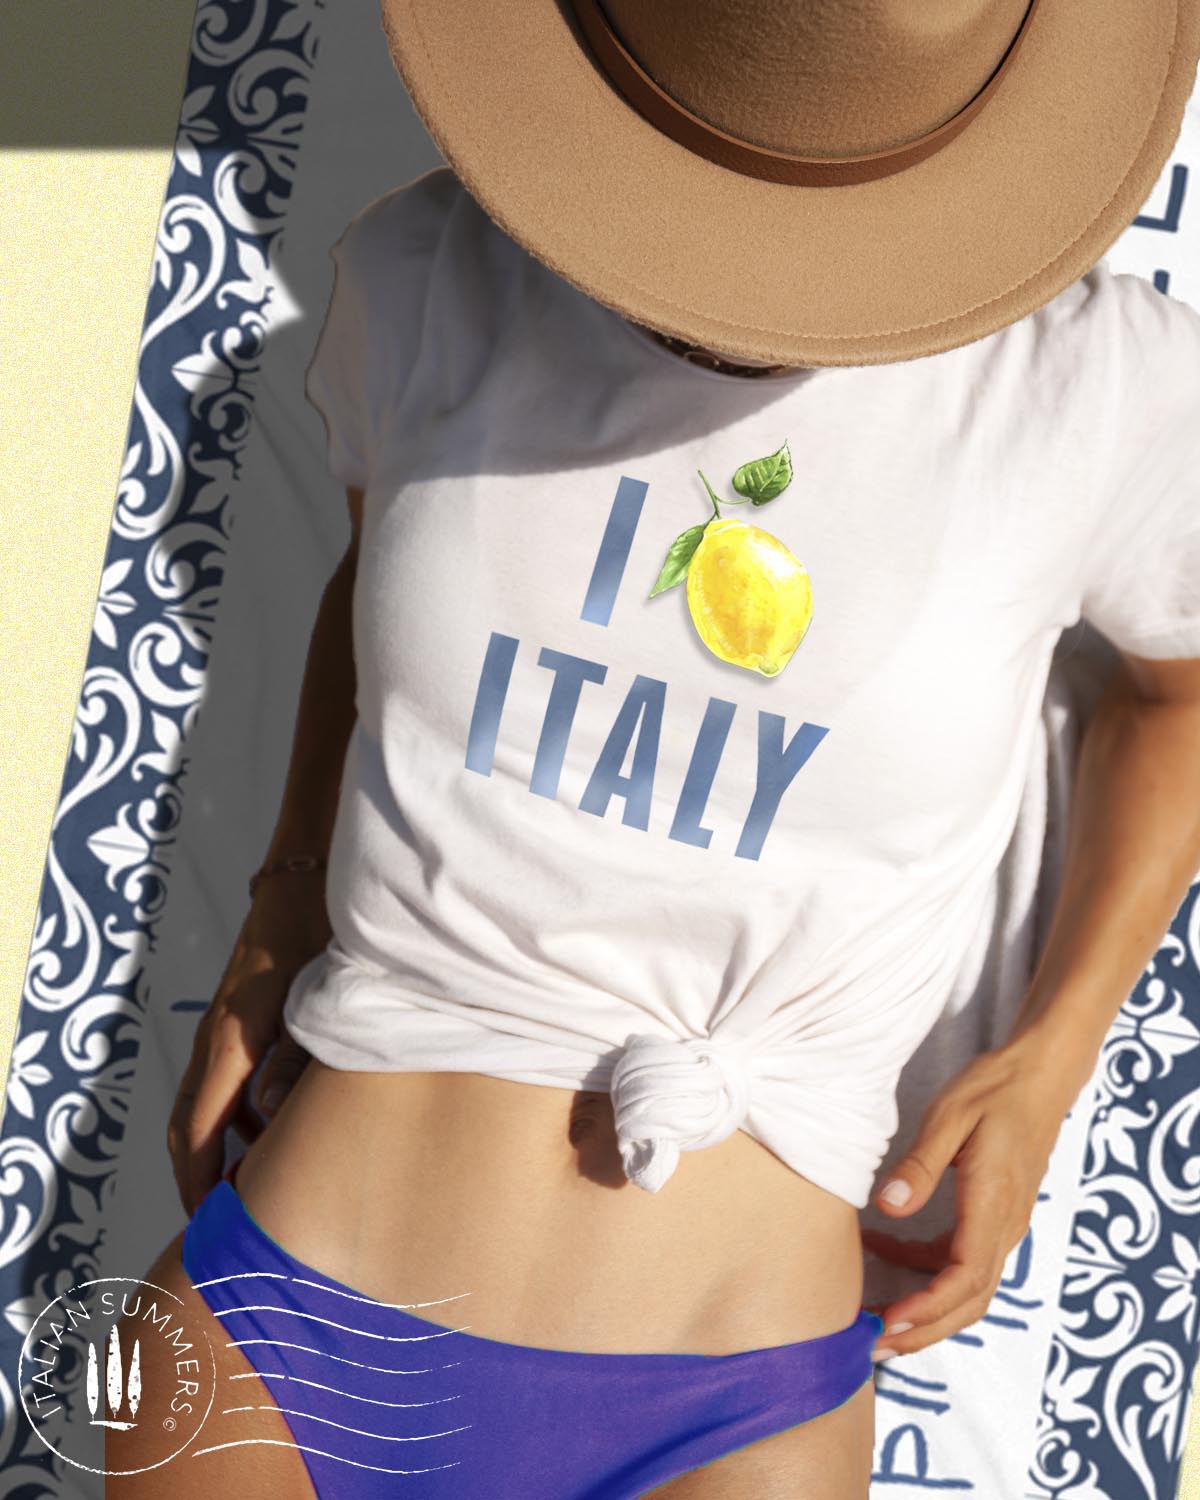 Italy Inspired white cotton unisex T shirt with the watercolored blue text : I Love Italy" where the word Love is symbolized by aan Amalfi Coast lemon instead of a red heart. Made by Italian Summers